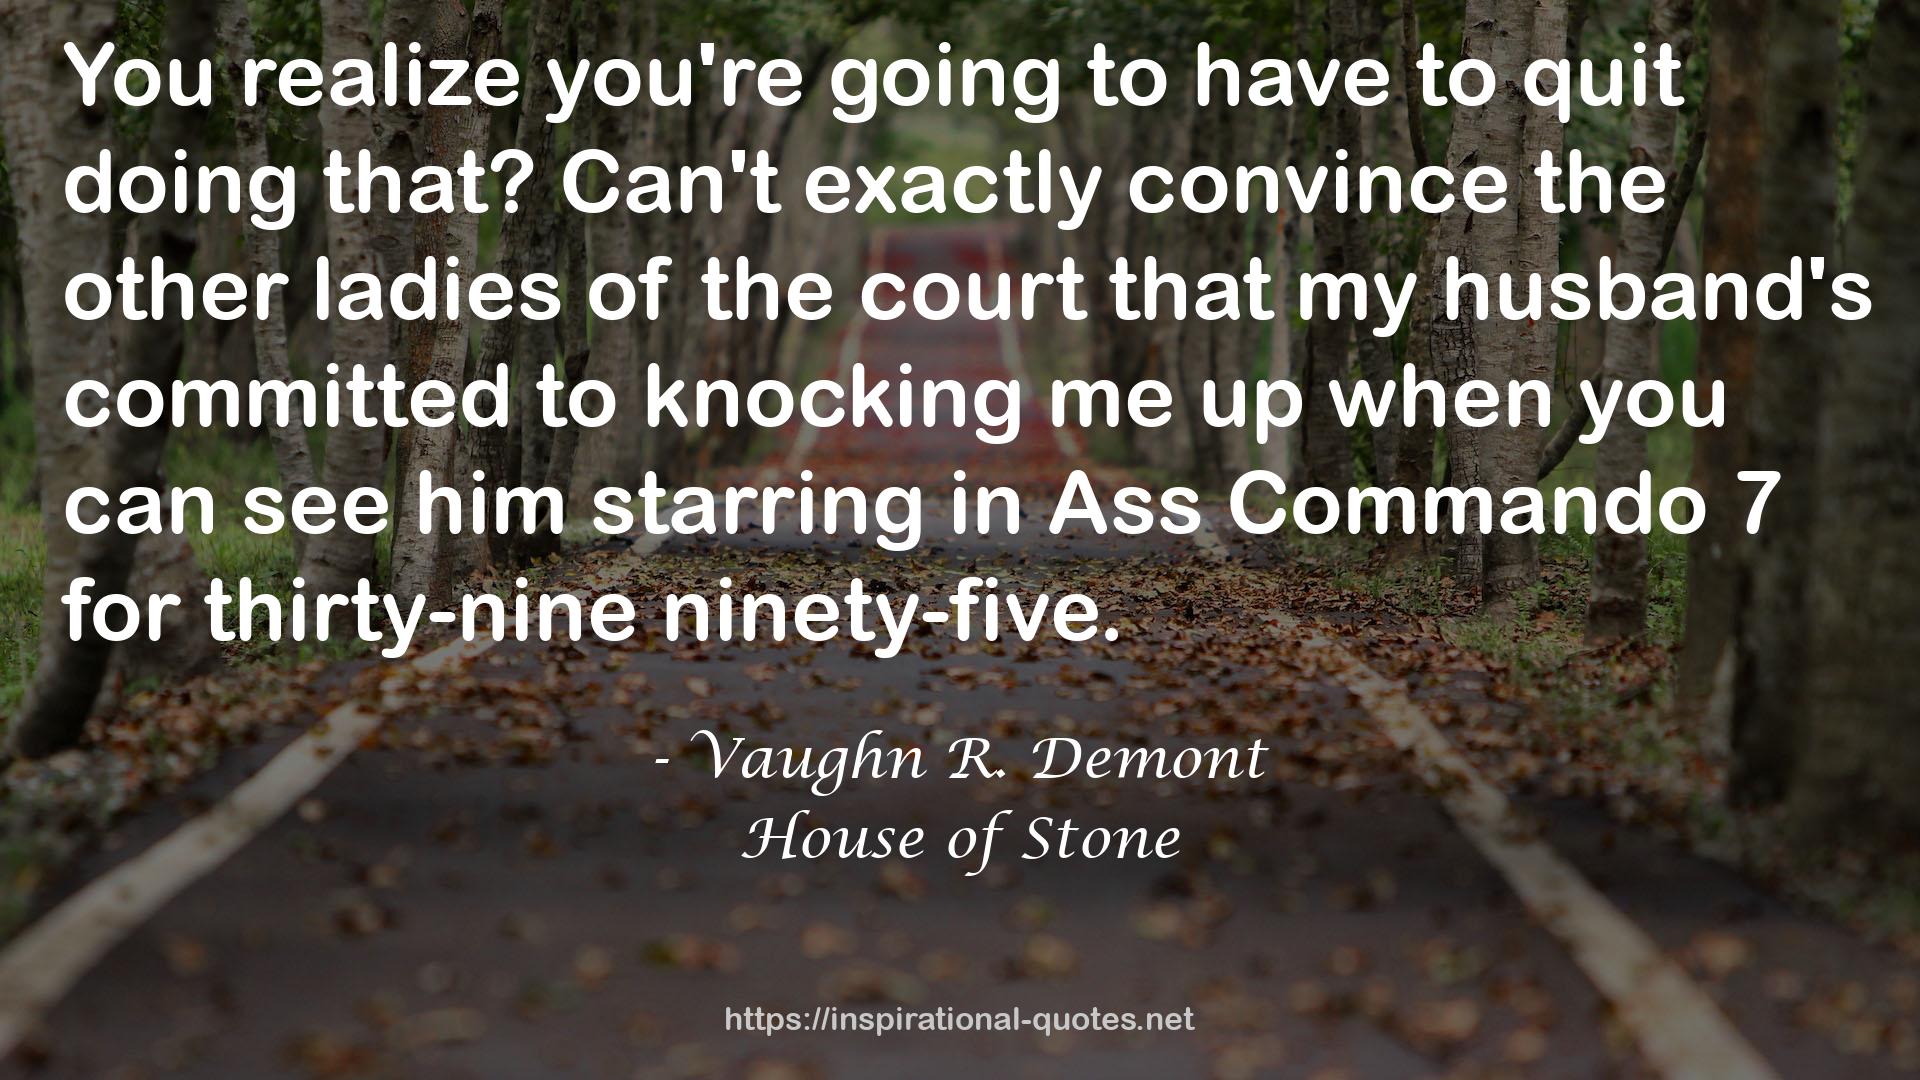 House of Stone QUOTES